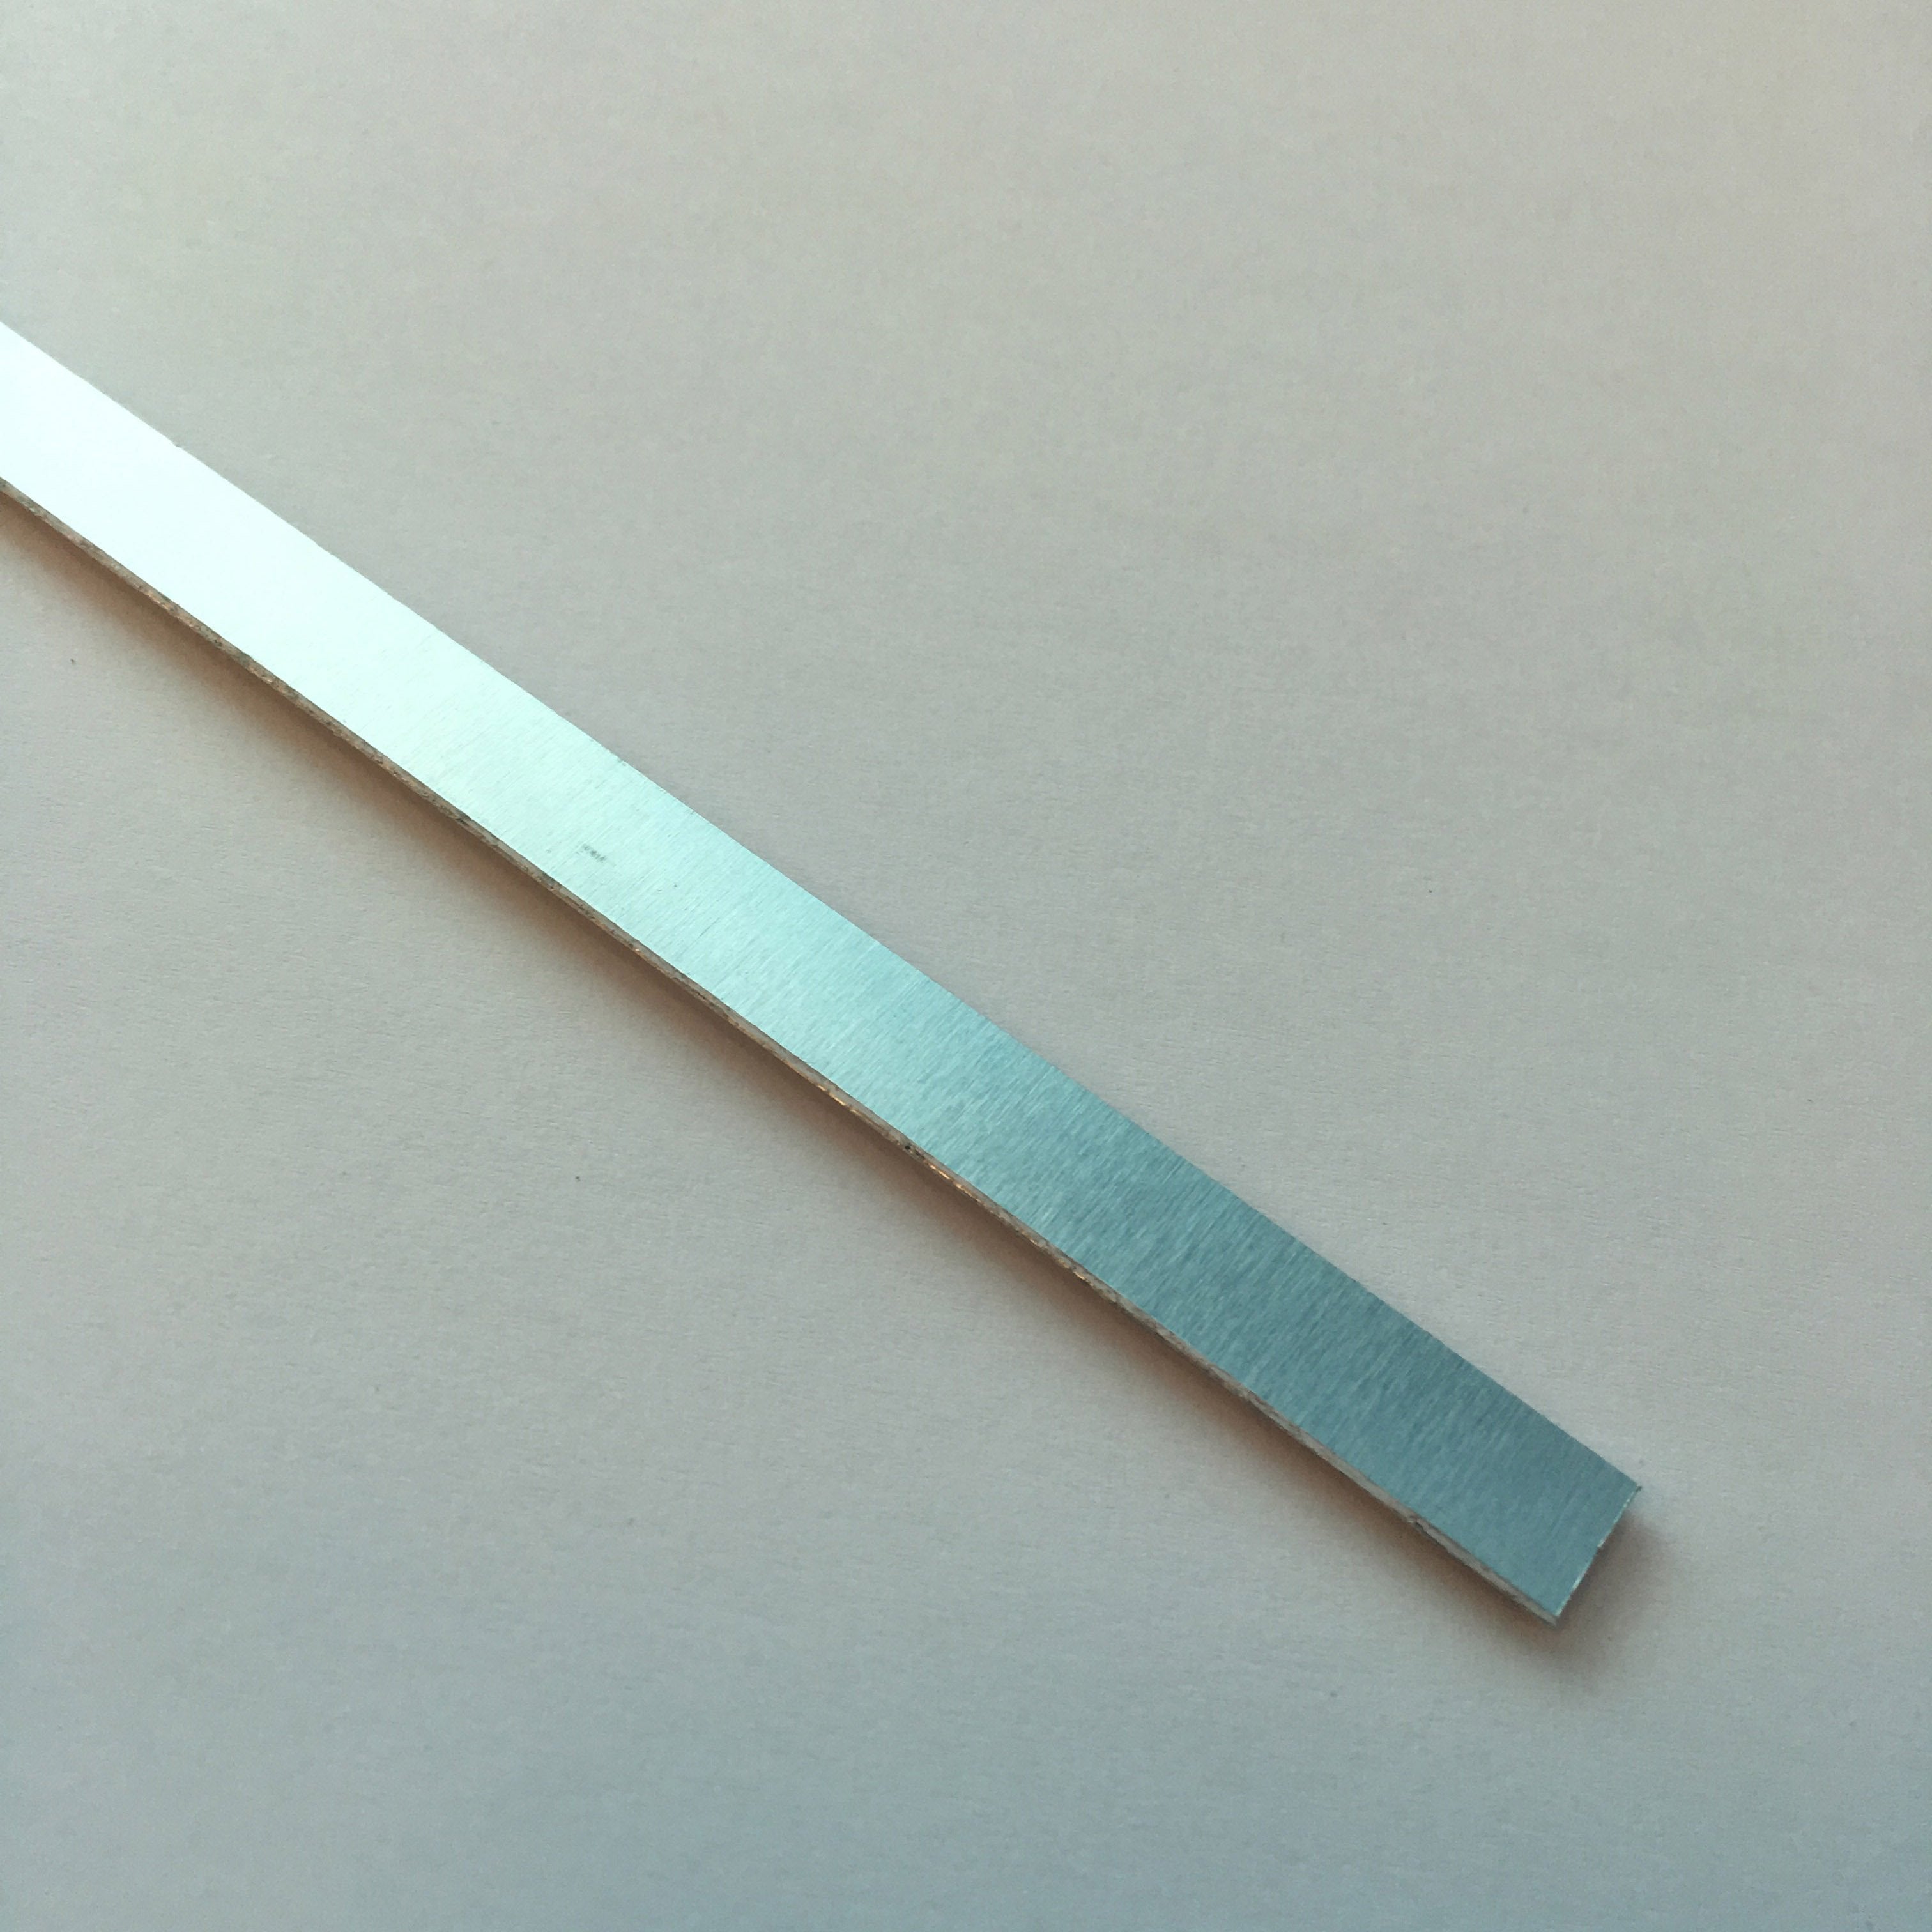 10mm wide heat sink for LED tape